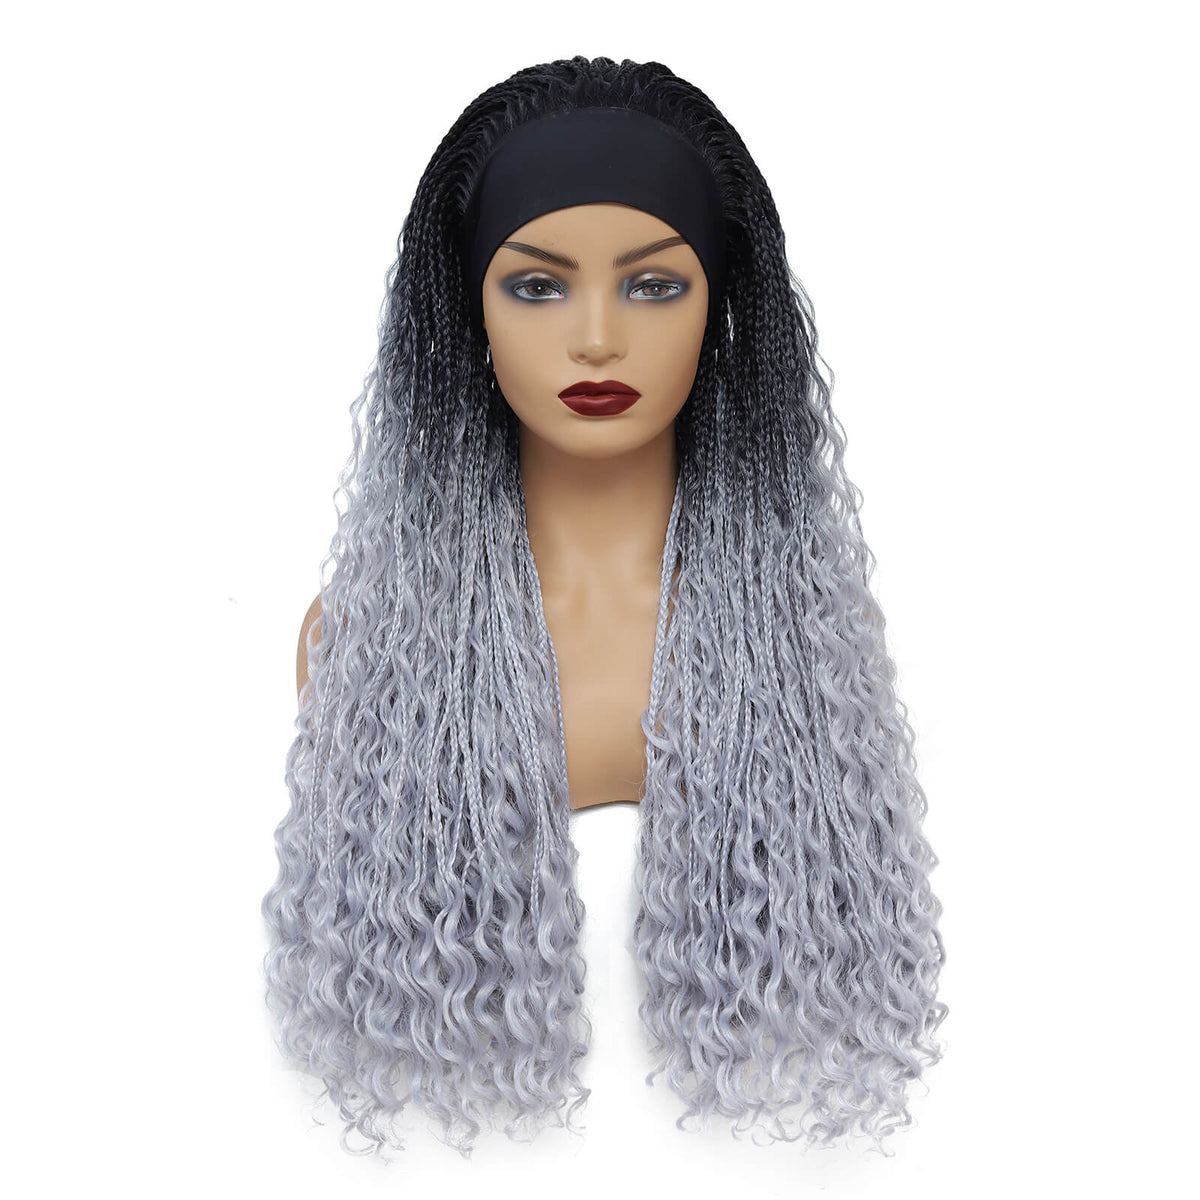 Headband Braided Wigs With Free Tress Box Braided Wigs for Black Women Long Micro Braids Wig Ombre Grey Color